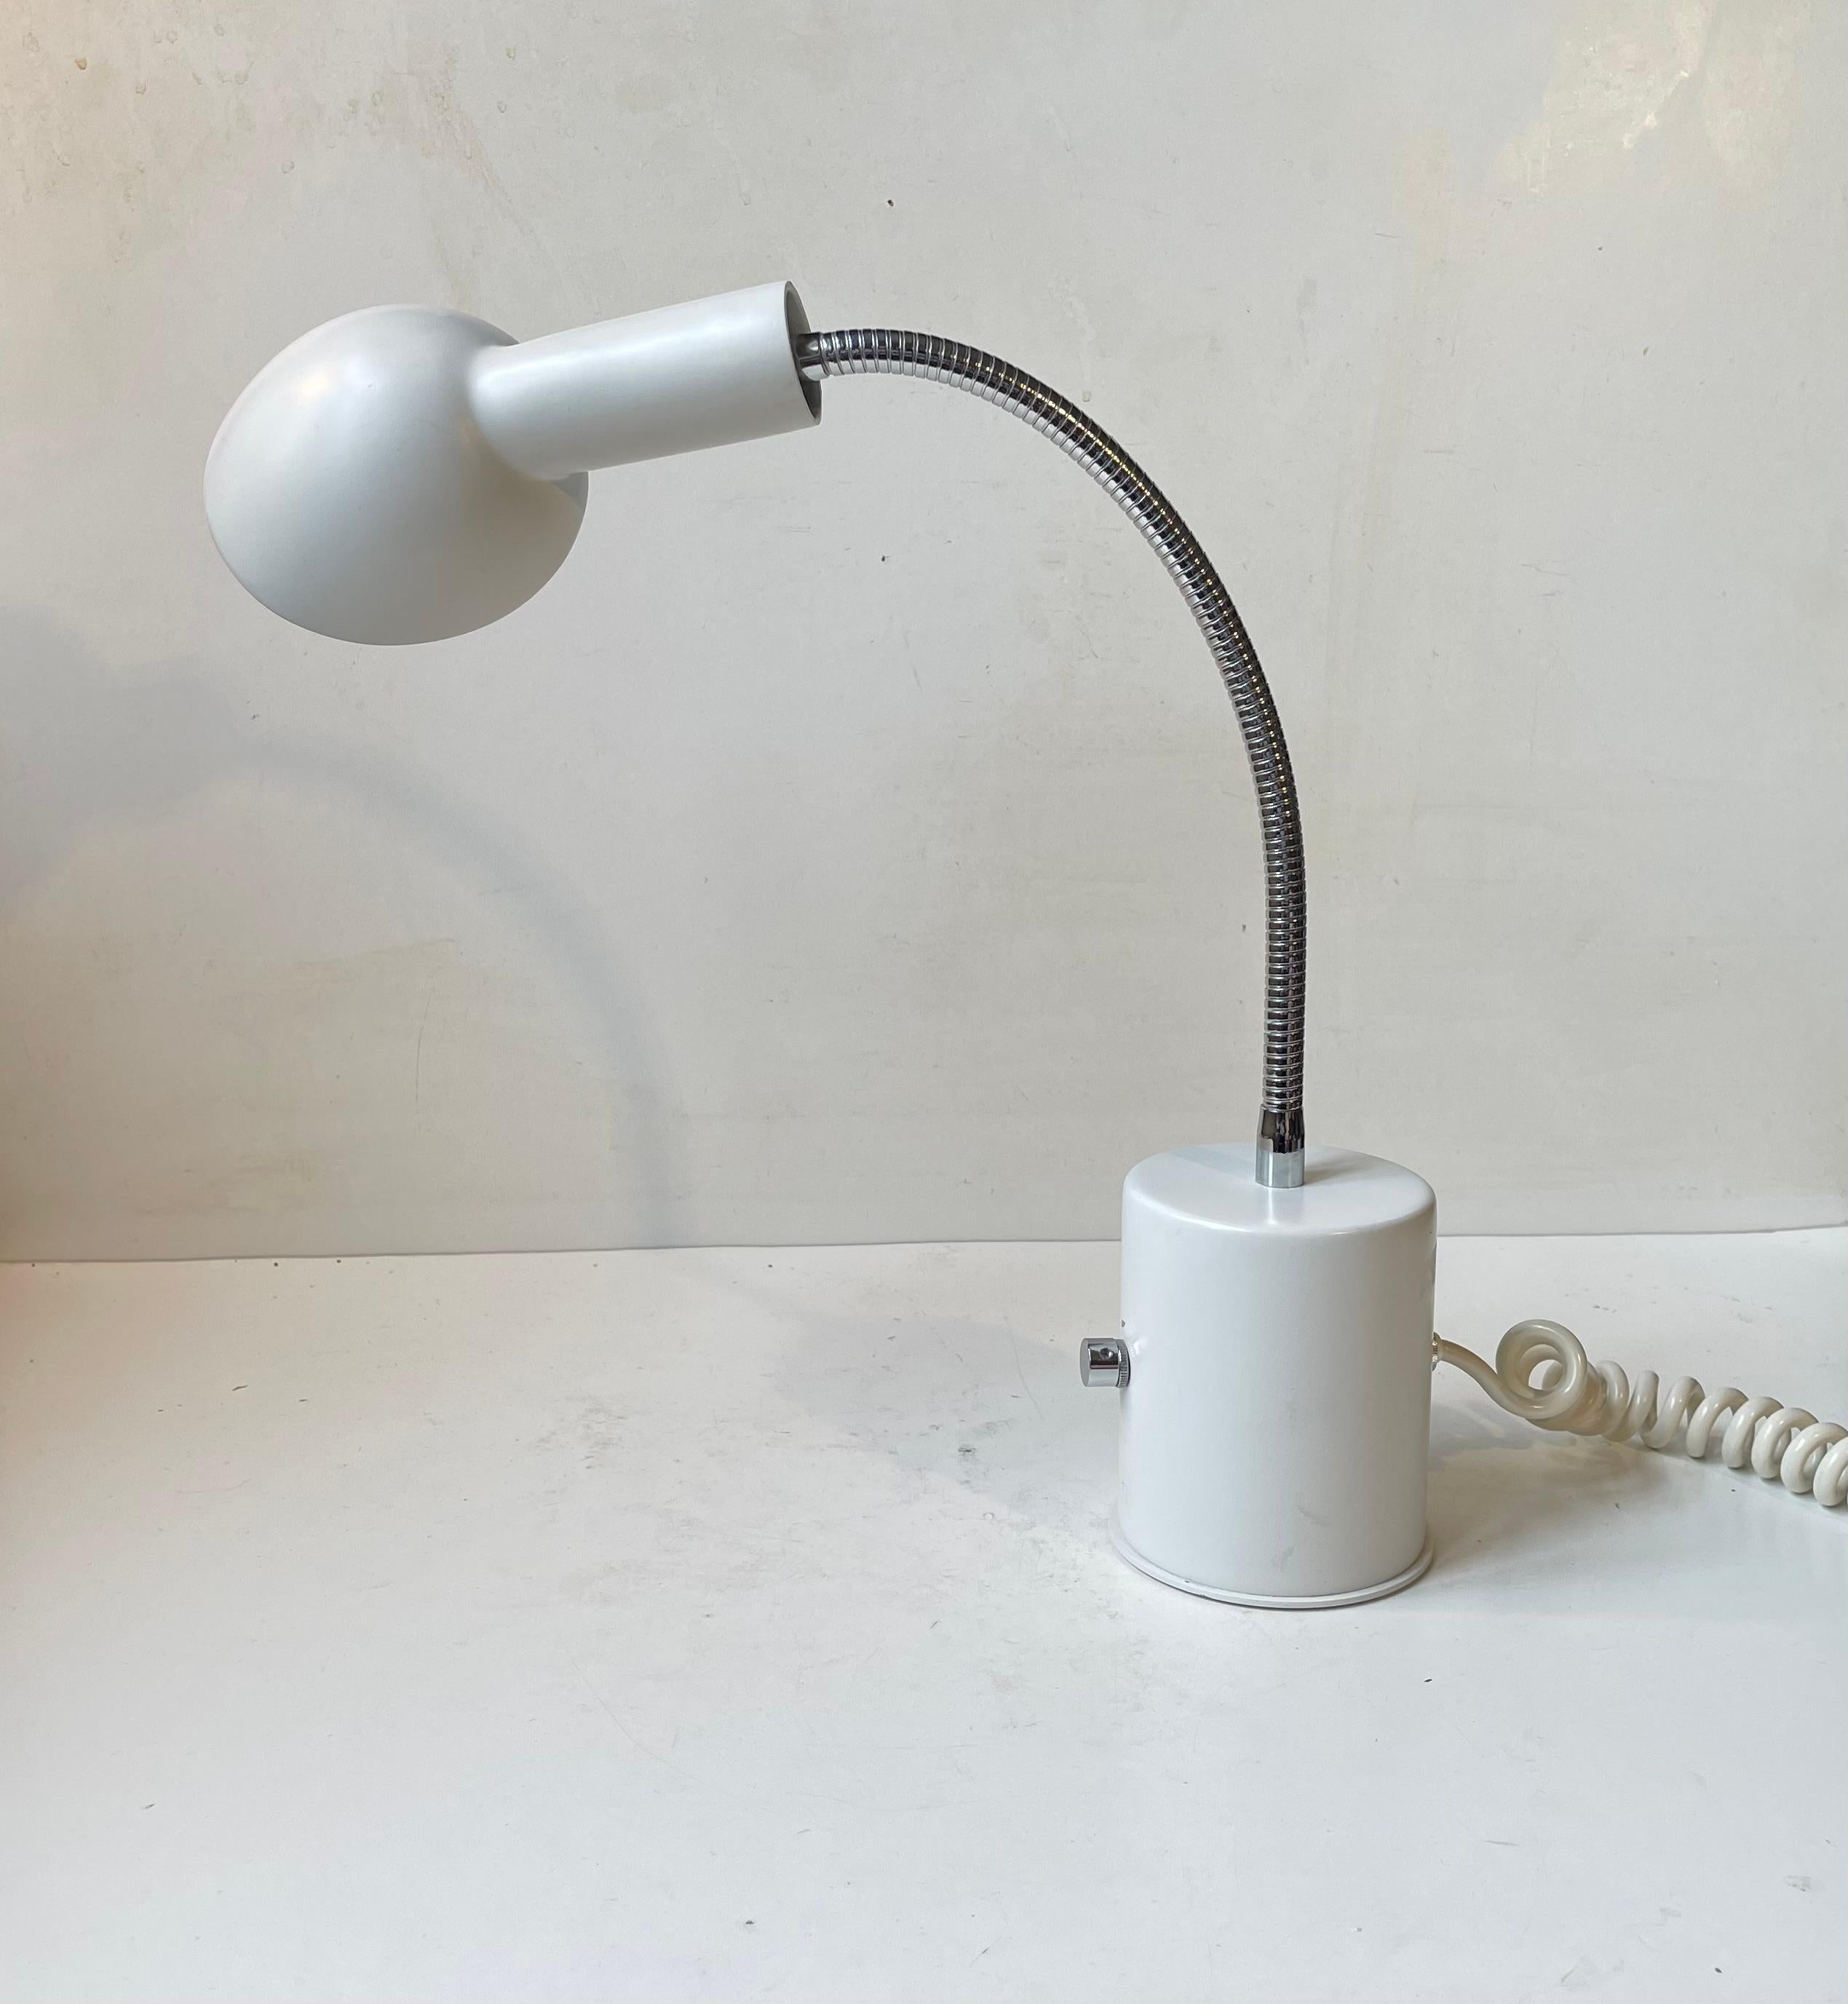 Asger B. C. White Danish Minimalist Architects Desk or Table Lamp, 1980s In Good Condition For Sale In Esbjerg, DK